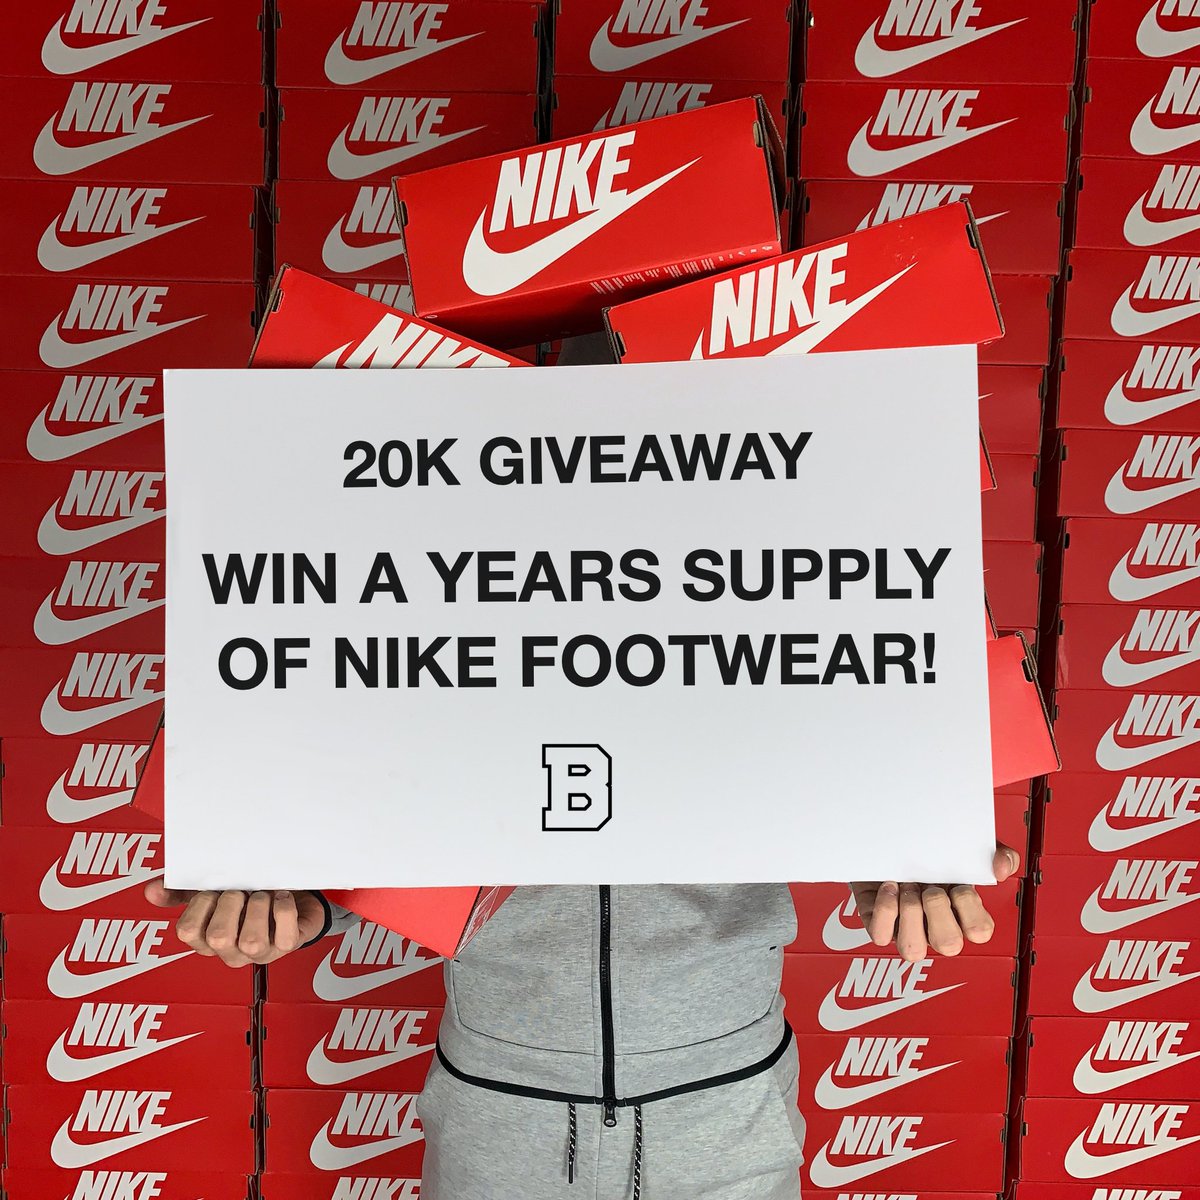 Win a Years Supply of Nike Footwear! 🚨 To enter: 1. RT this tweet 2. Follow @Bennetts_ Winner Announced 16th May 9PM - Good Luck! 🏆